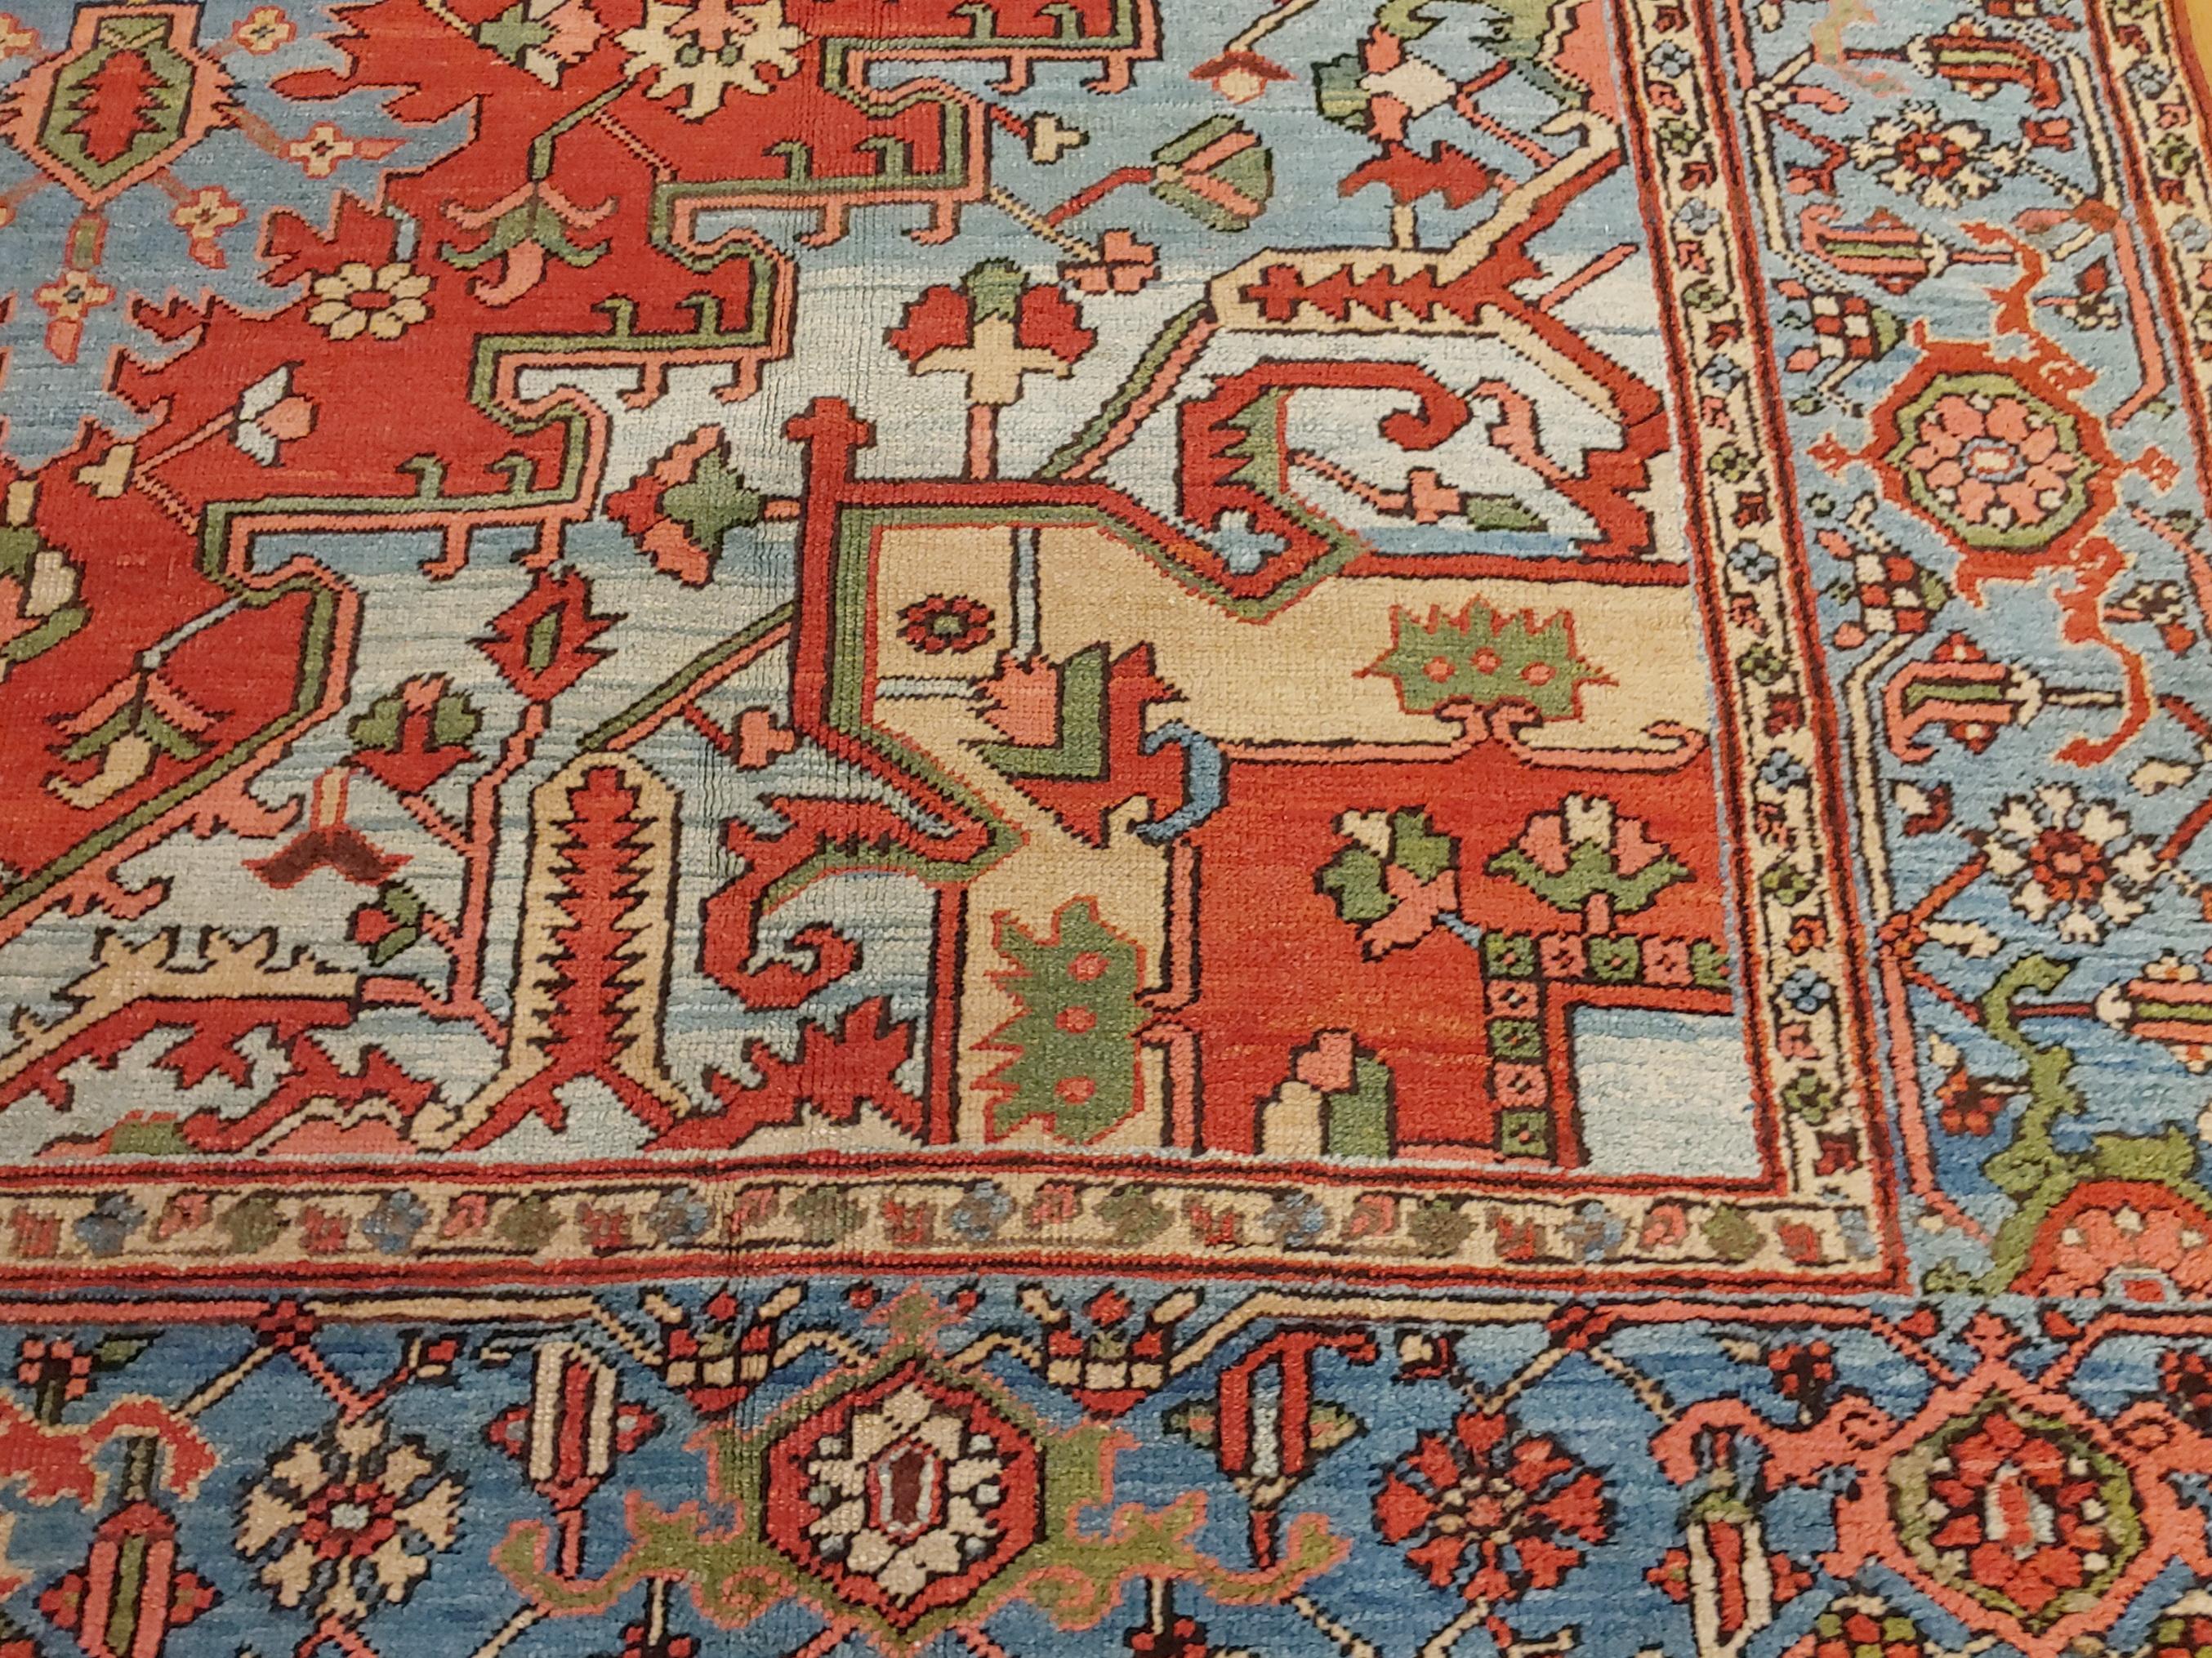 Antique Persian Heriz Rug, Rust Colored with Light Blue Wool, Room Size 1